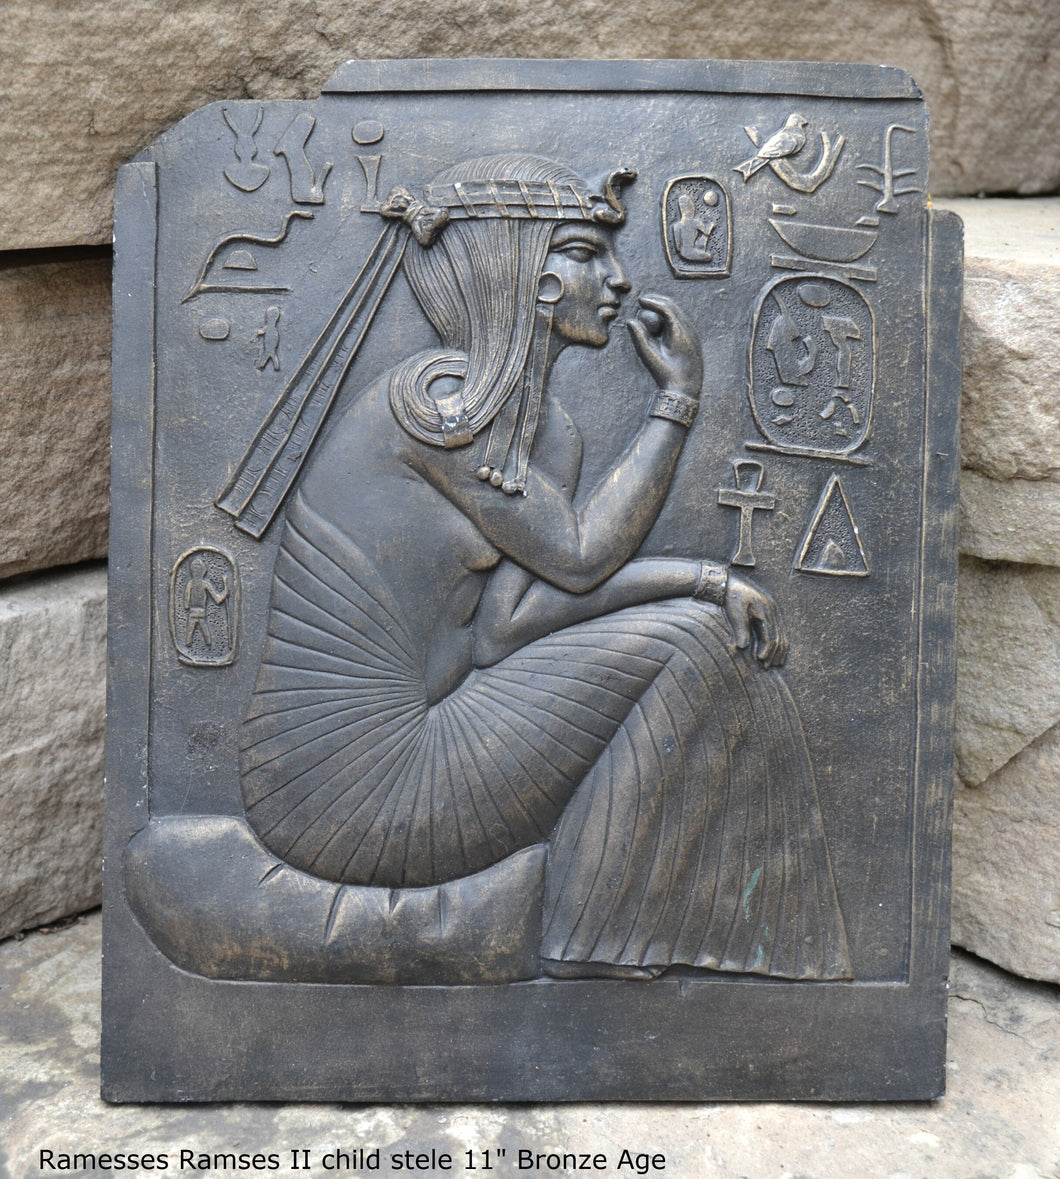 Egyptian Ramesses Ramses II child stele wall plaque Sculpture museum reproduction art 11